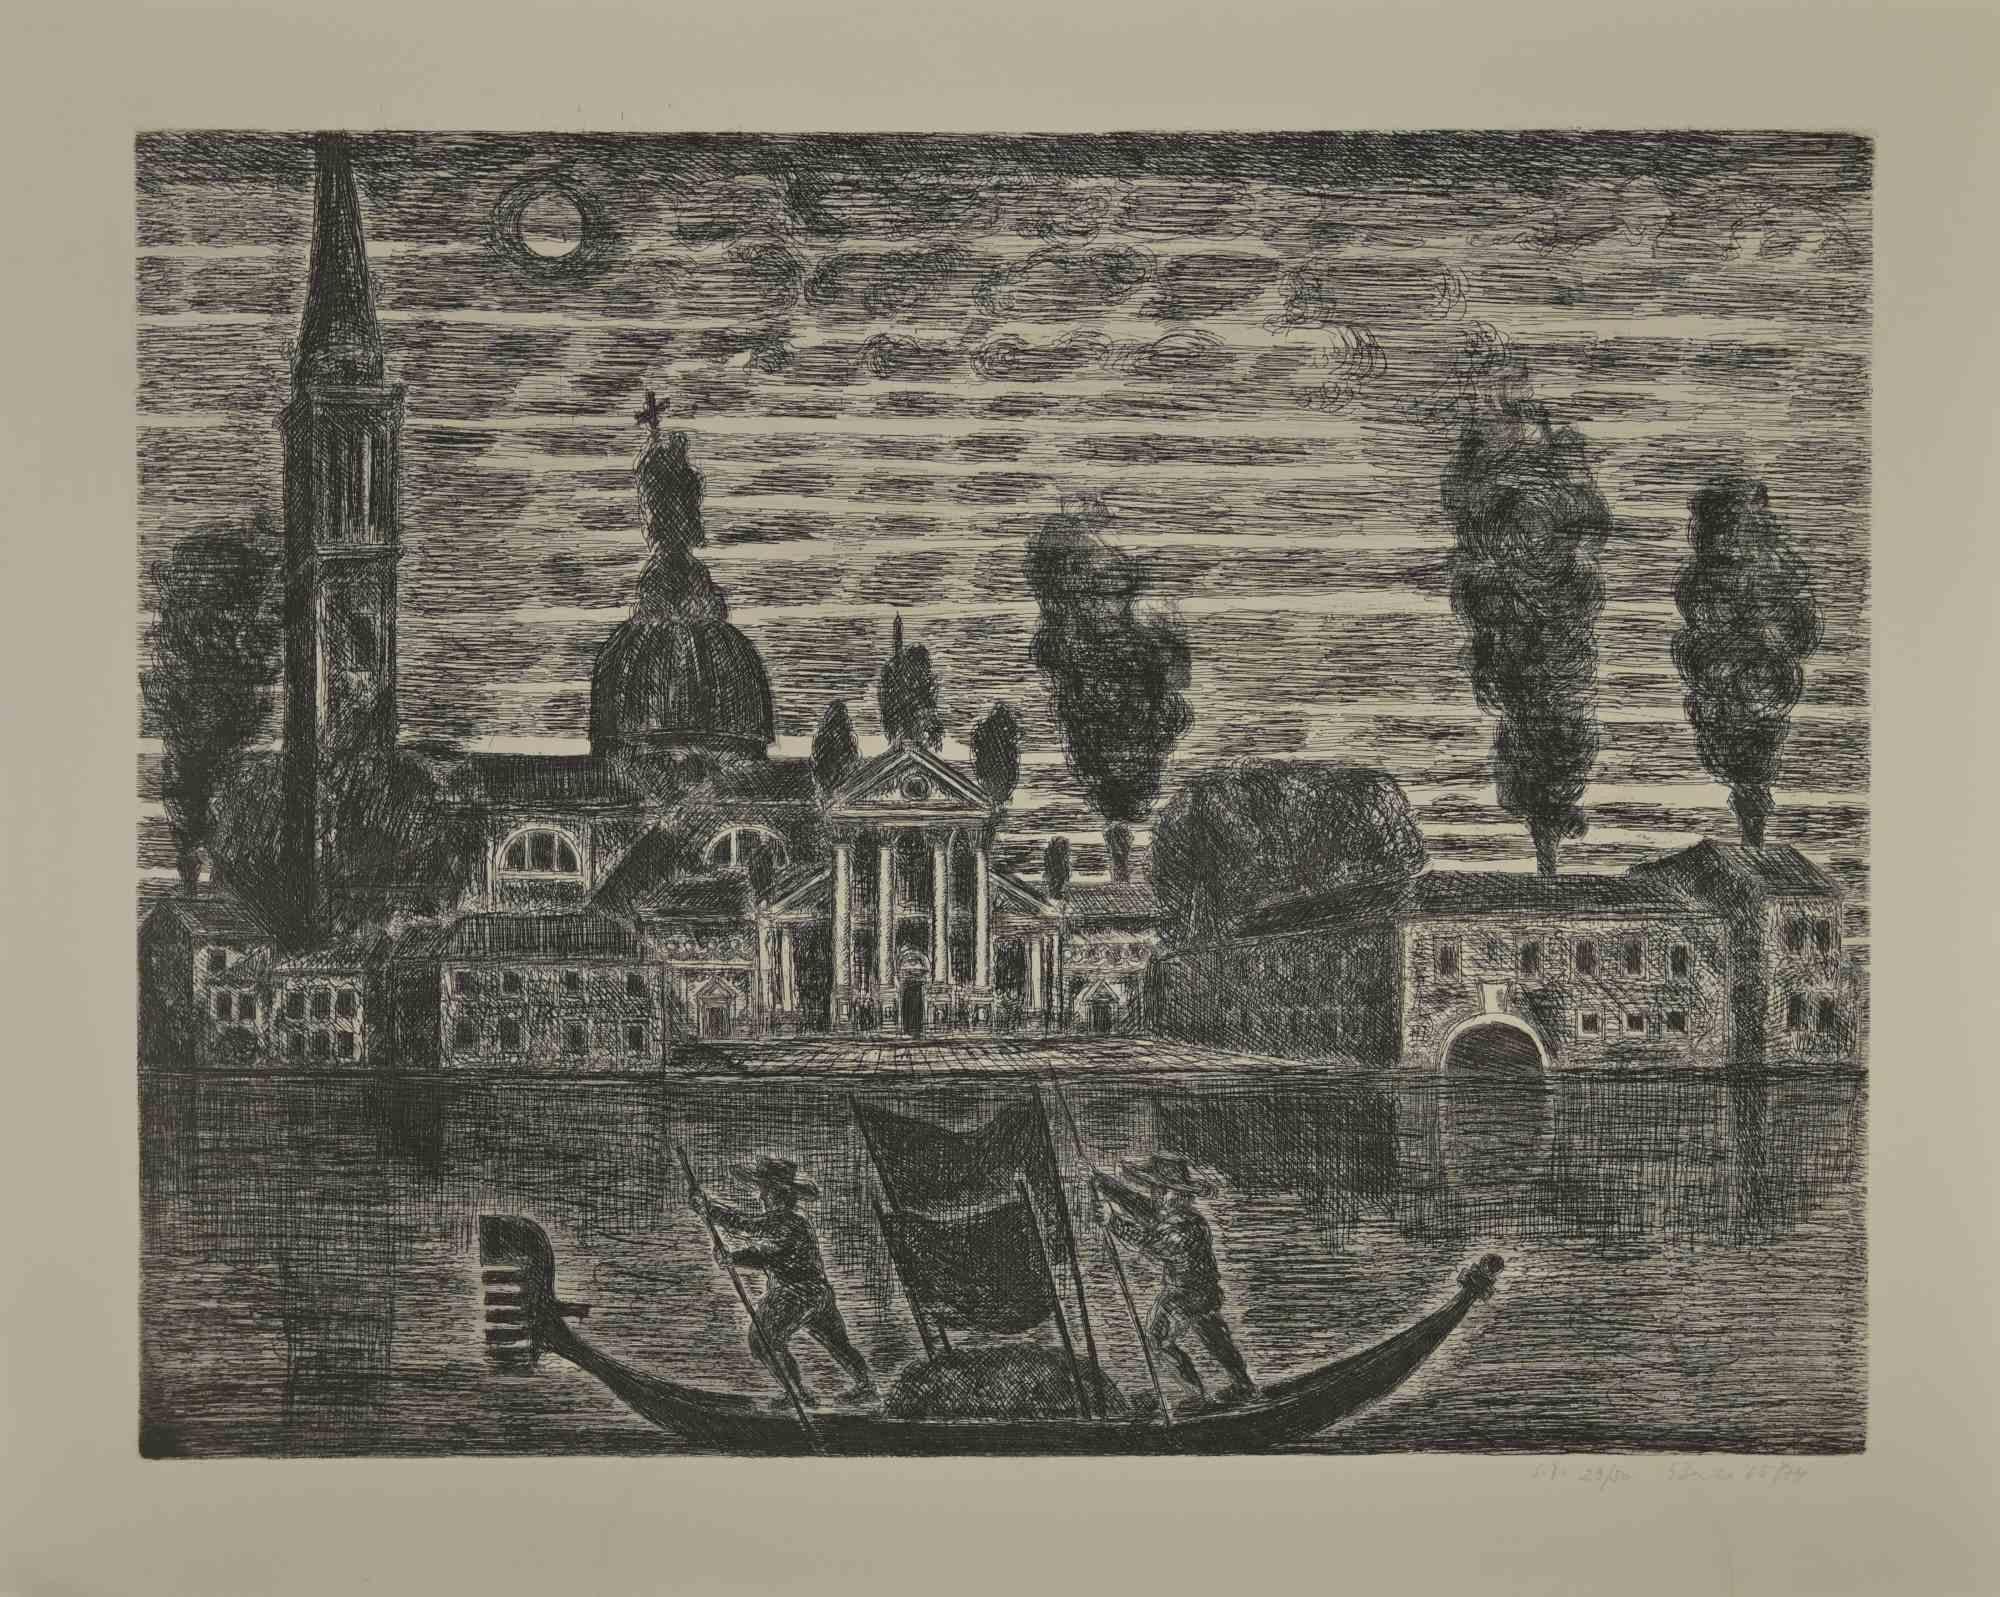 Gondoliers in Venice is an etching realized by Gianpaolo Berto in 1974.

60 X 75 cm , no frame.

Edition 29/50. Numbered and firmed by the artist in the lower margin.

Good conditions.

 

Gianpaolo Berto (1940) was born and raised in the